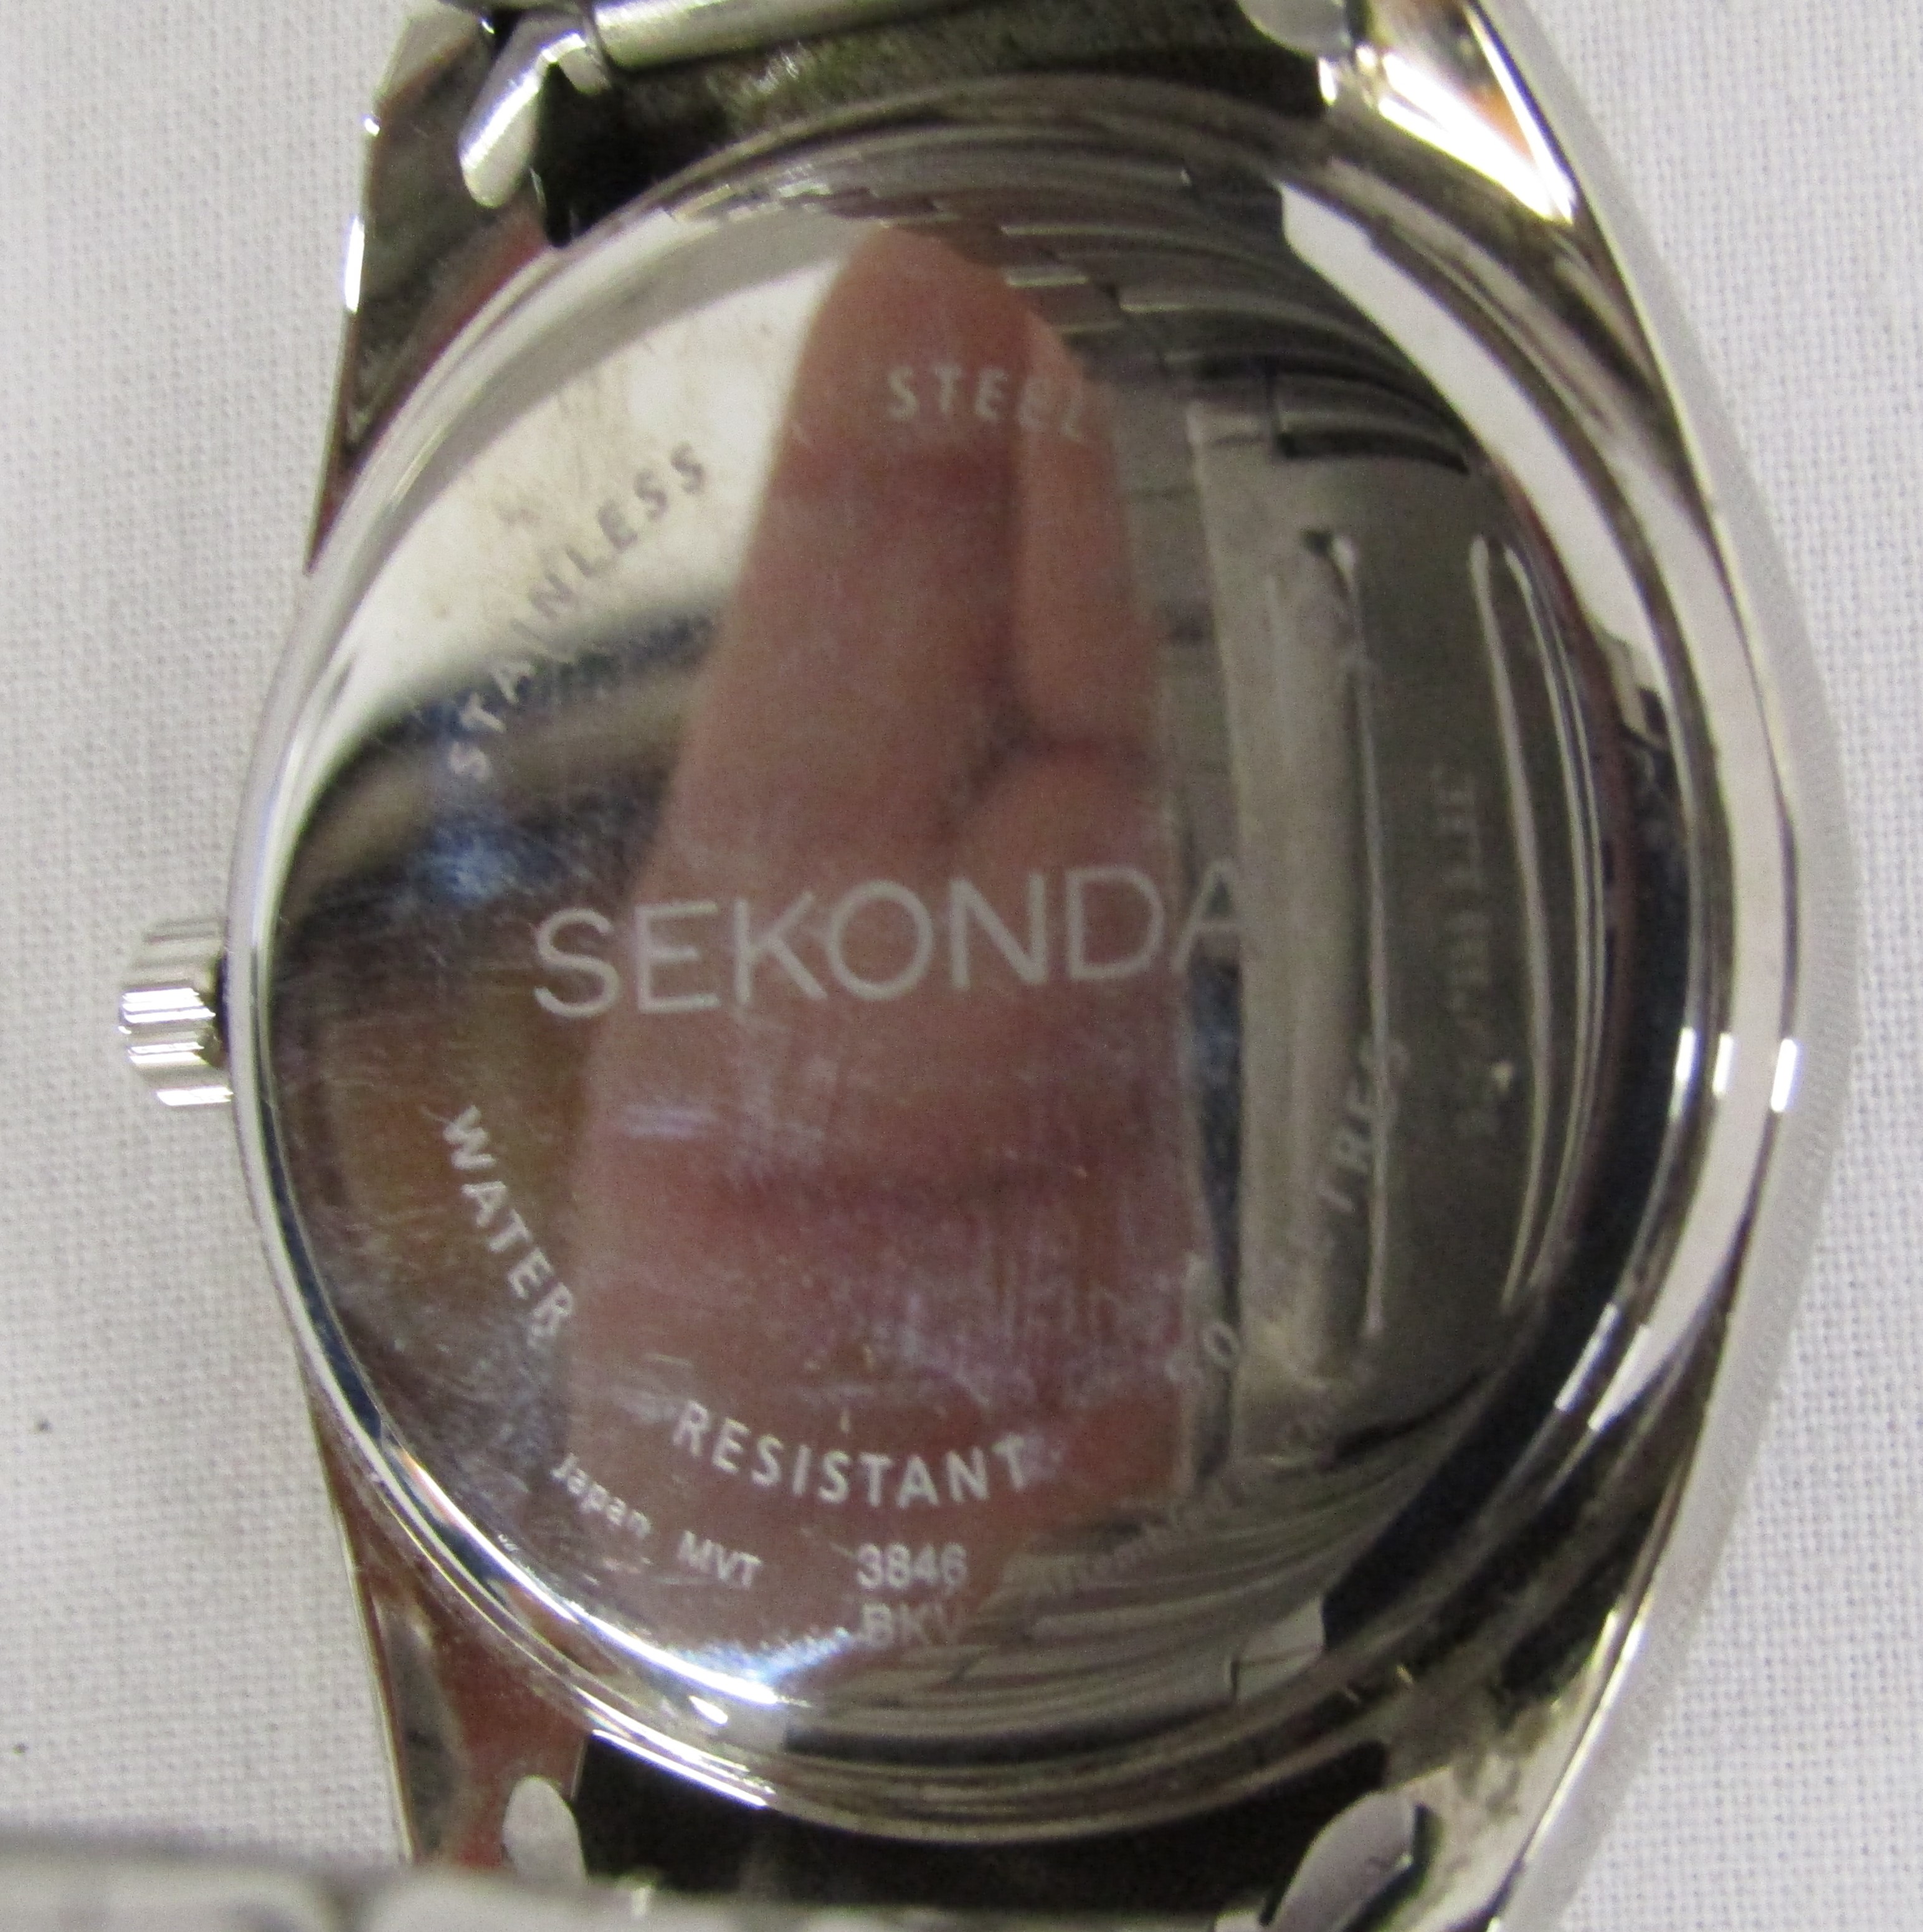 6 men's Sekonda watches - 1525 digital, 03405 with date, 3846 with date, 3407H chronograph, N3490 - Image 7 of 13